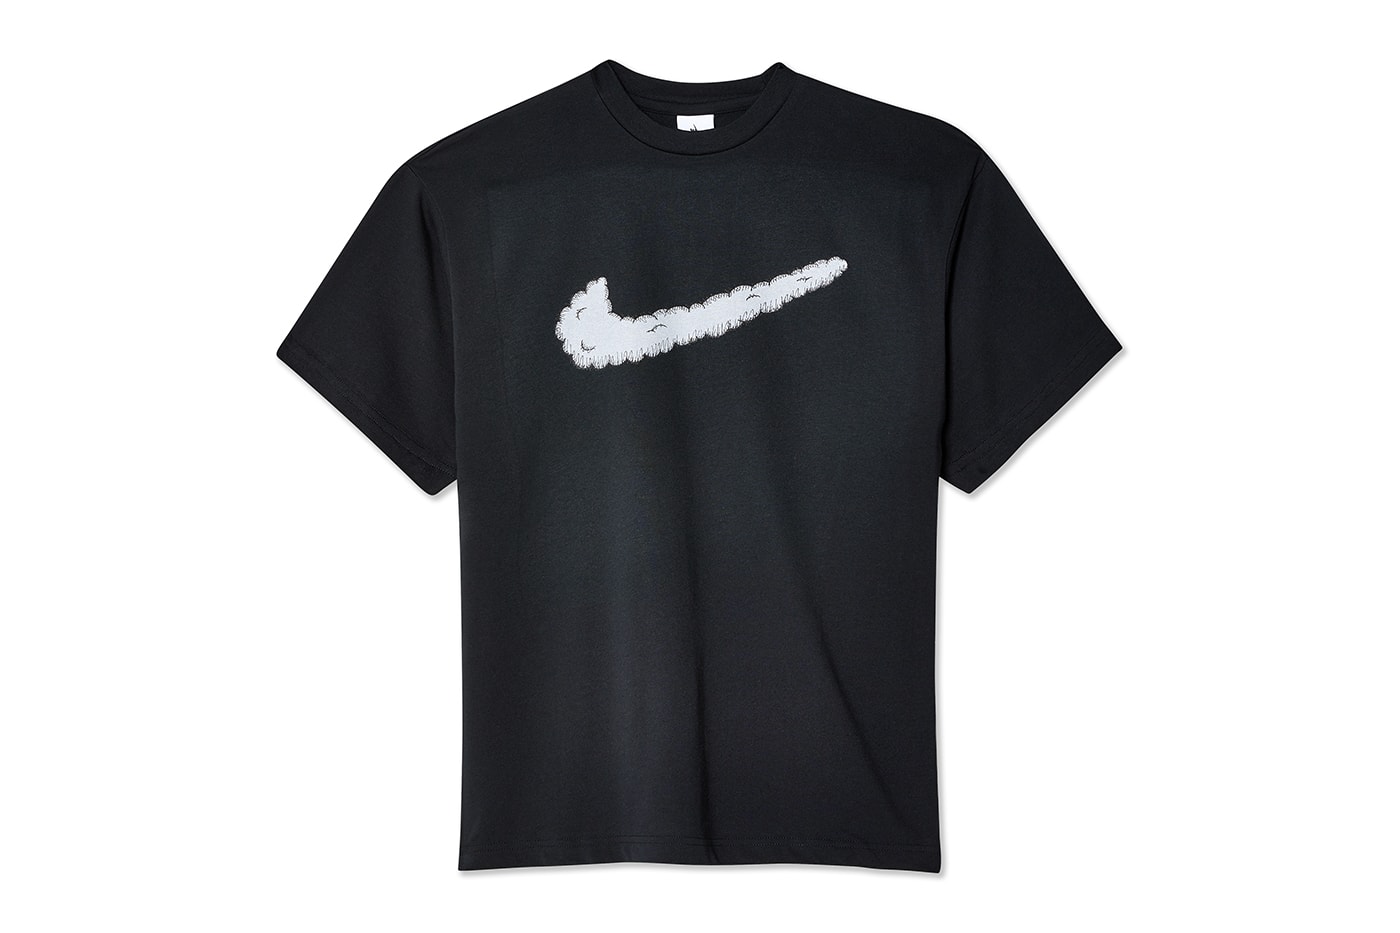 Dover Street Market NY Celebrates 10 Years With Limited Edition Sky High Farm Workwear x Nike x KAWS Collab new york shfww shirts nike air force 1 cloud force 1 lqqk arena embroidery hudson valley by made x hudson